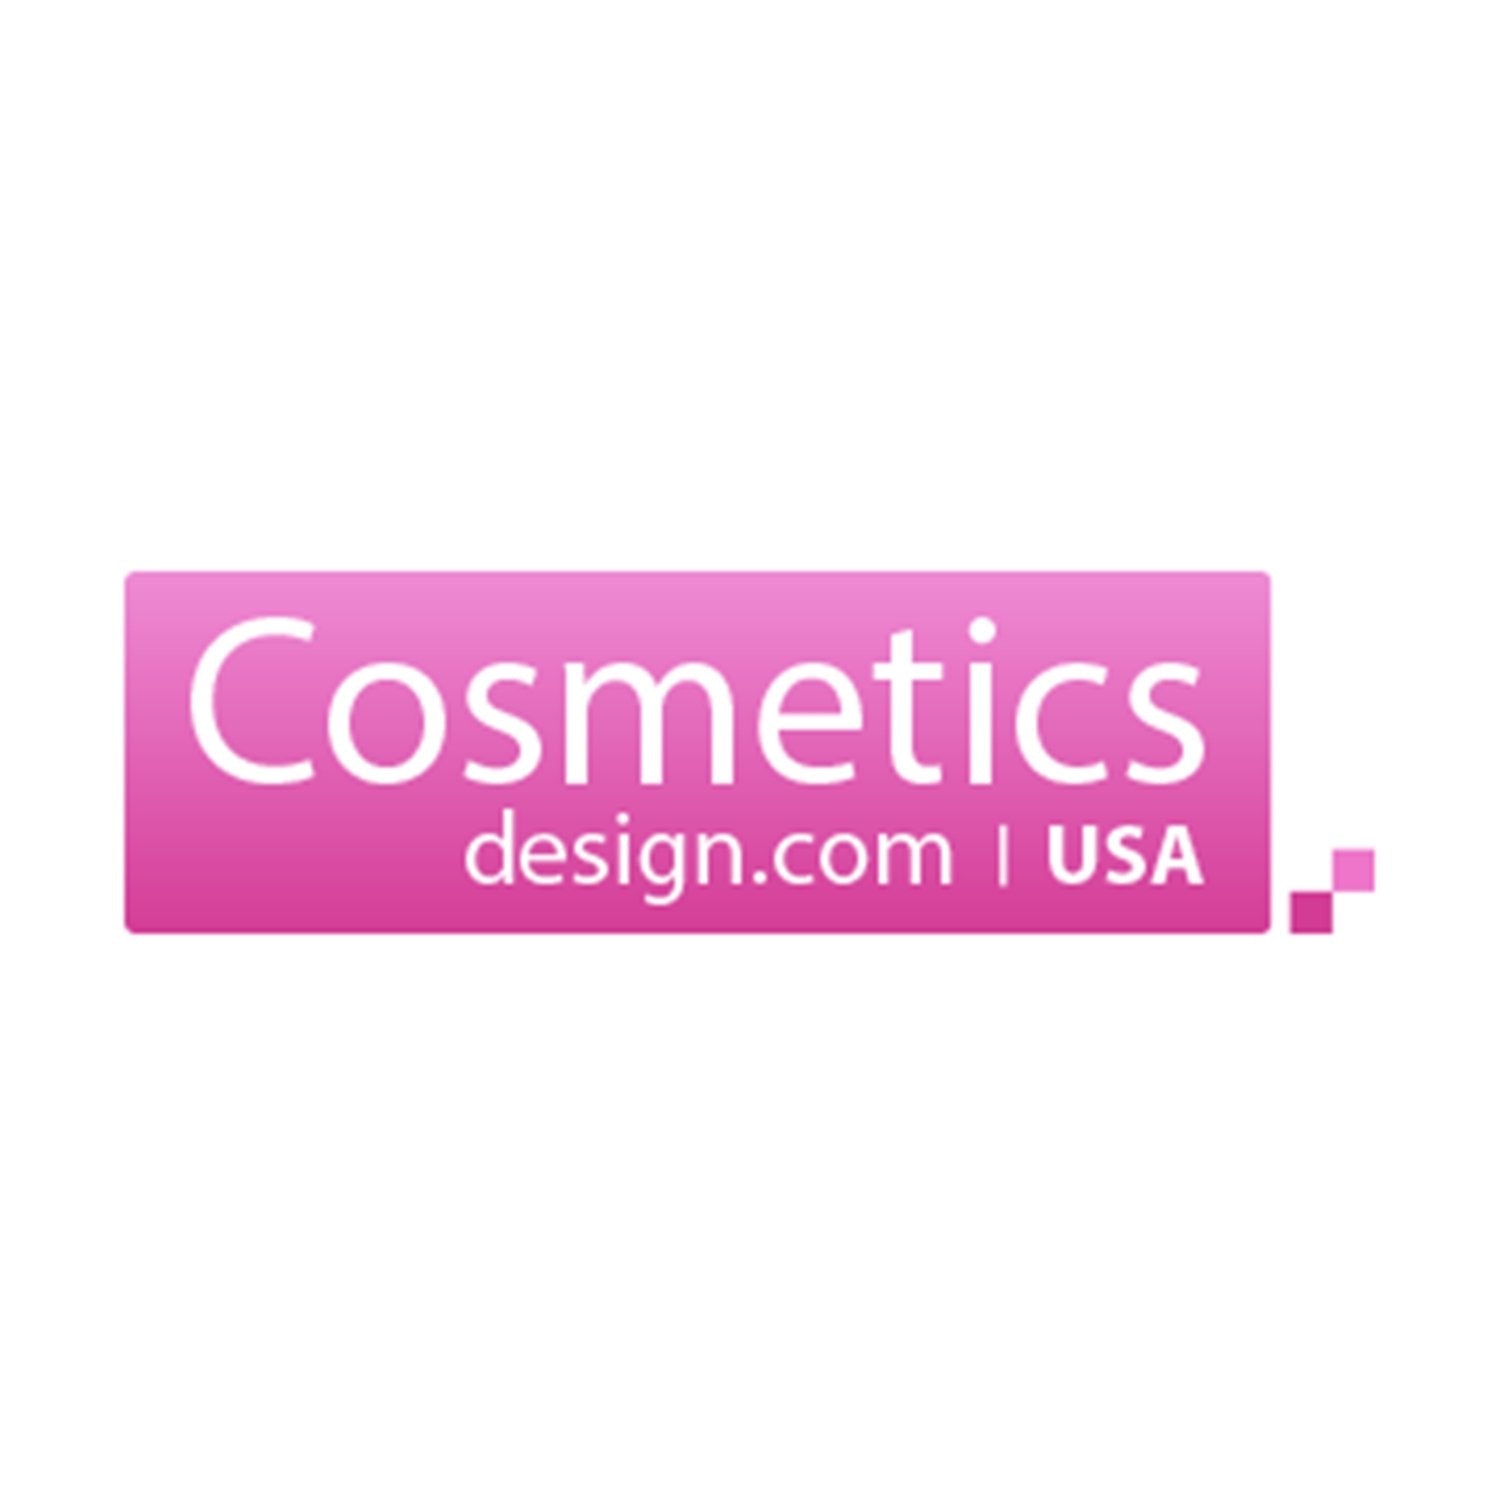 Cosmetics Design Editor Interviews April - SAVE ME FROM